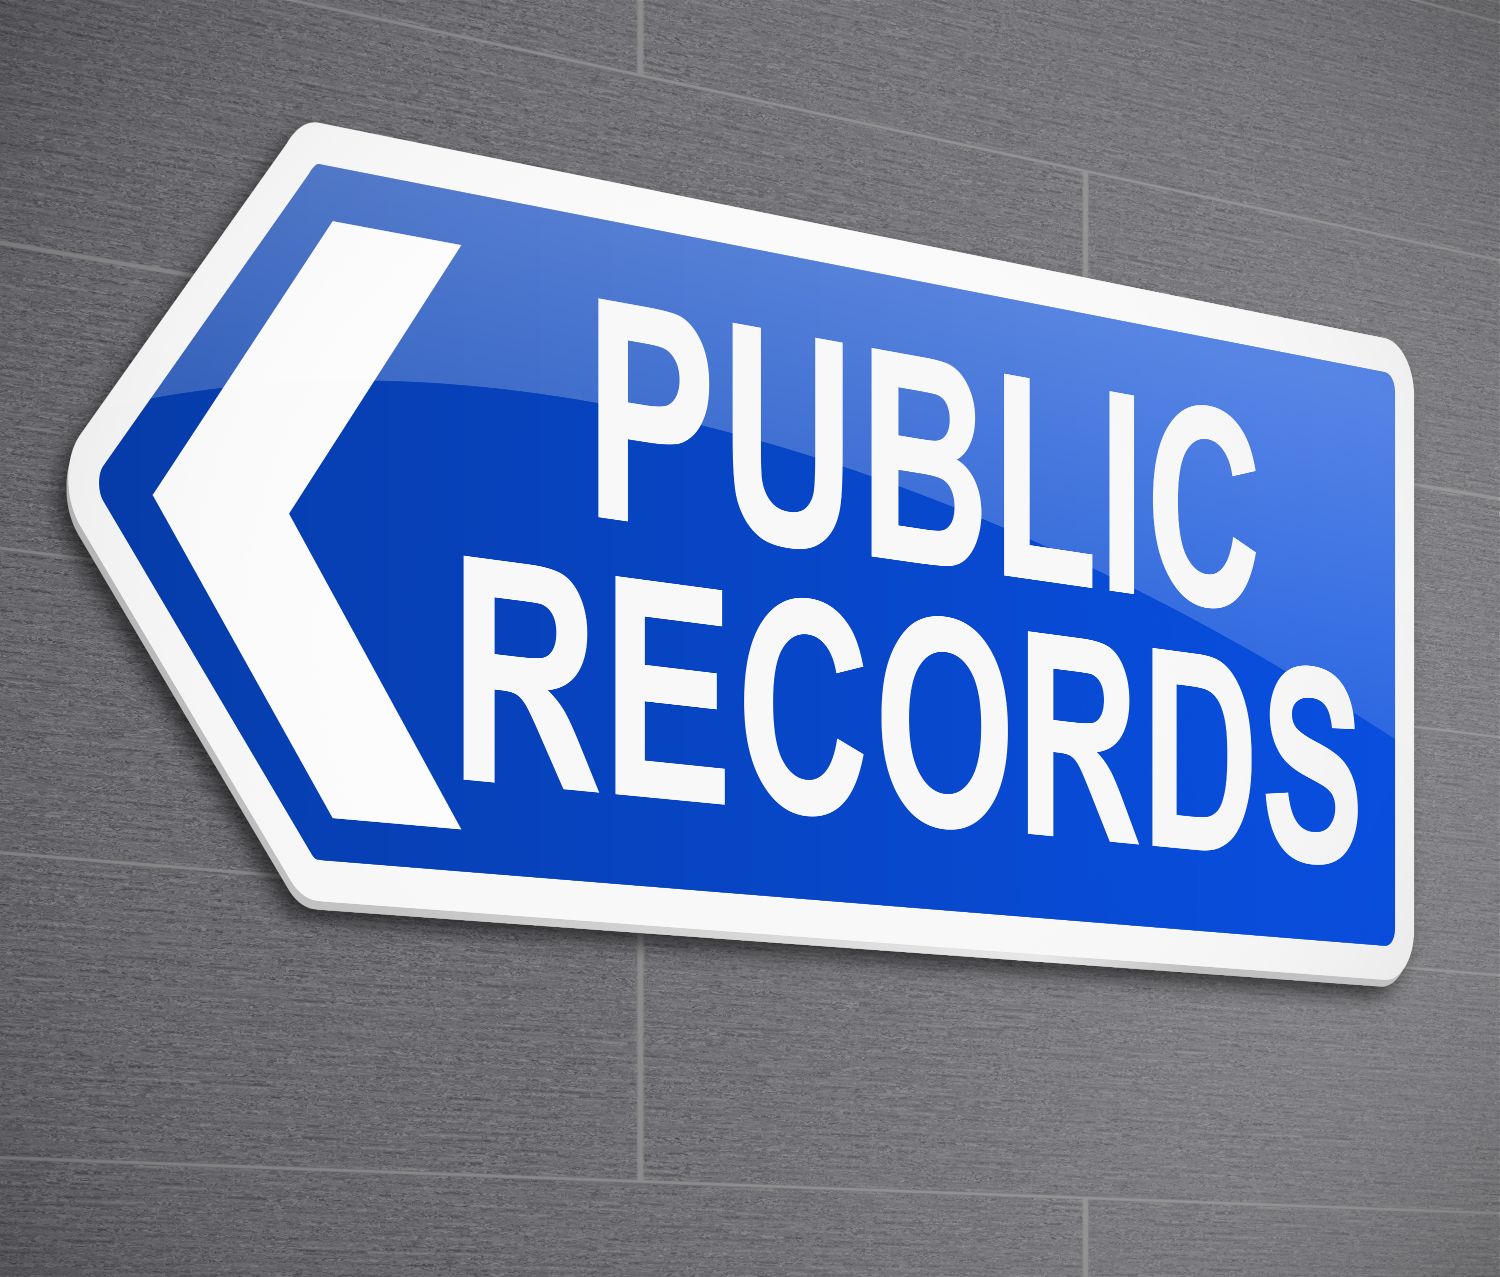 Public Records placard on wall